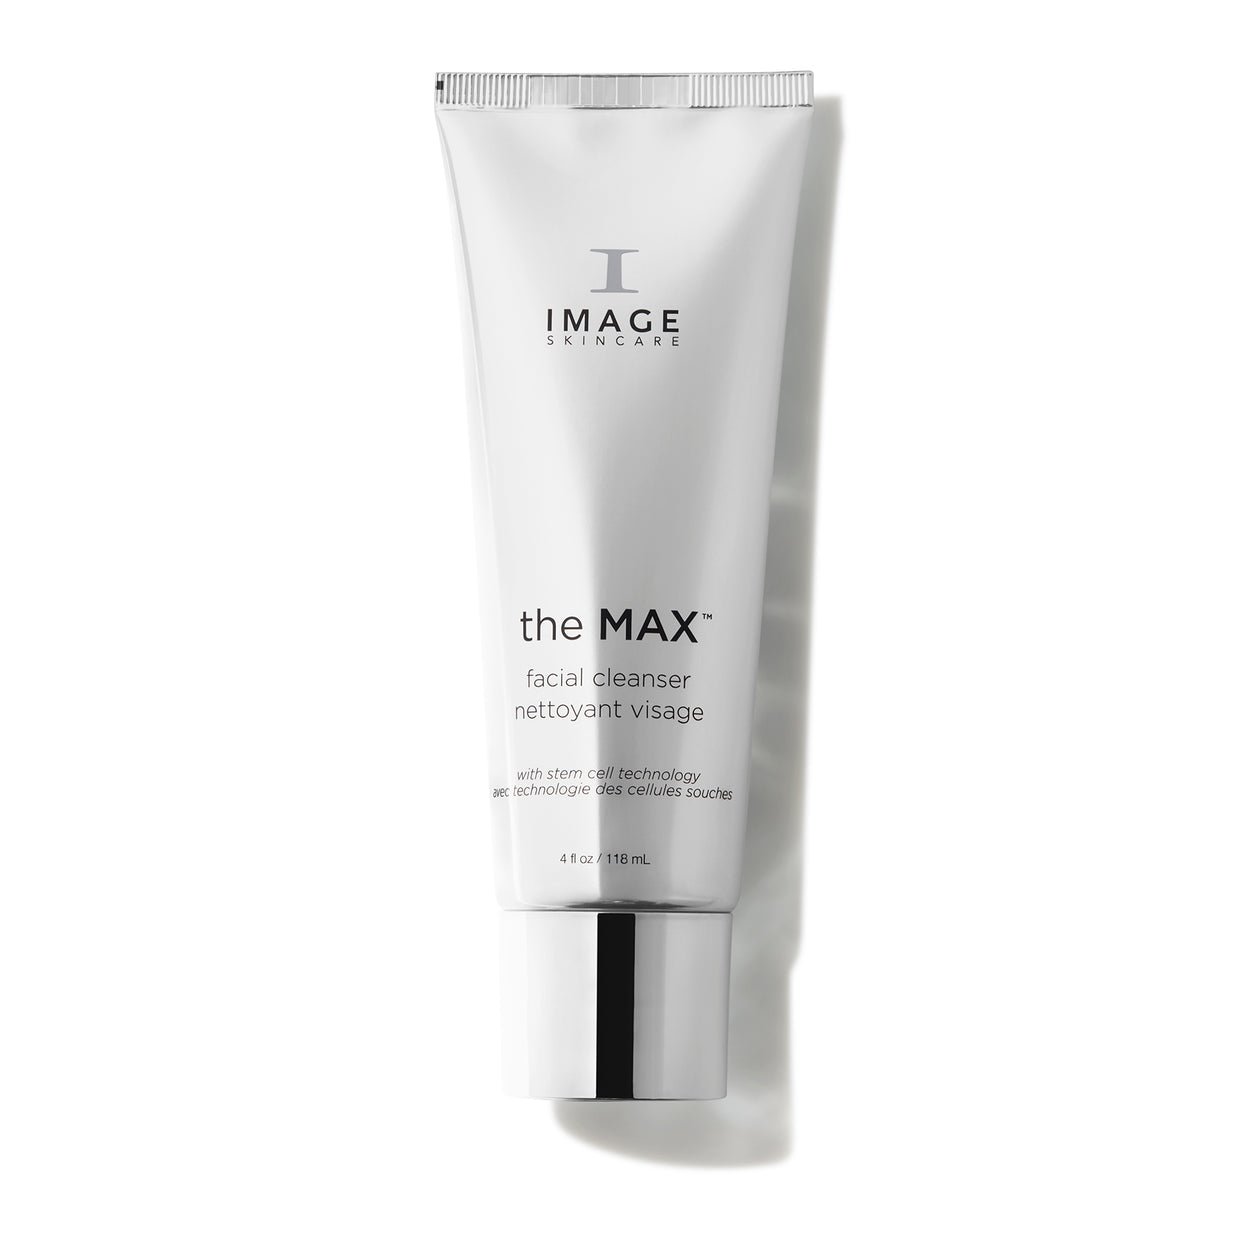 Image Skincare The Max Facial Cleanser Shop At Exclusive Beauty